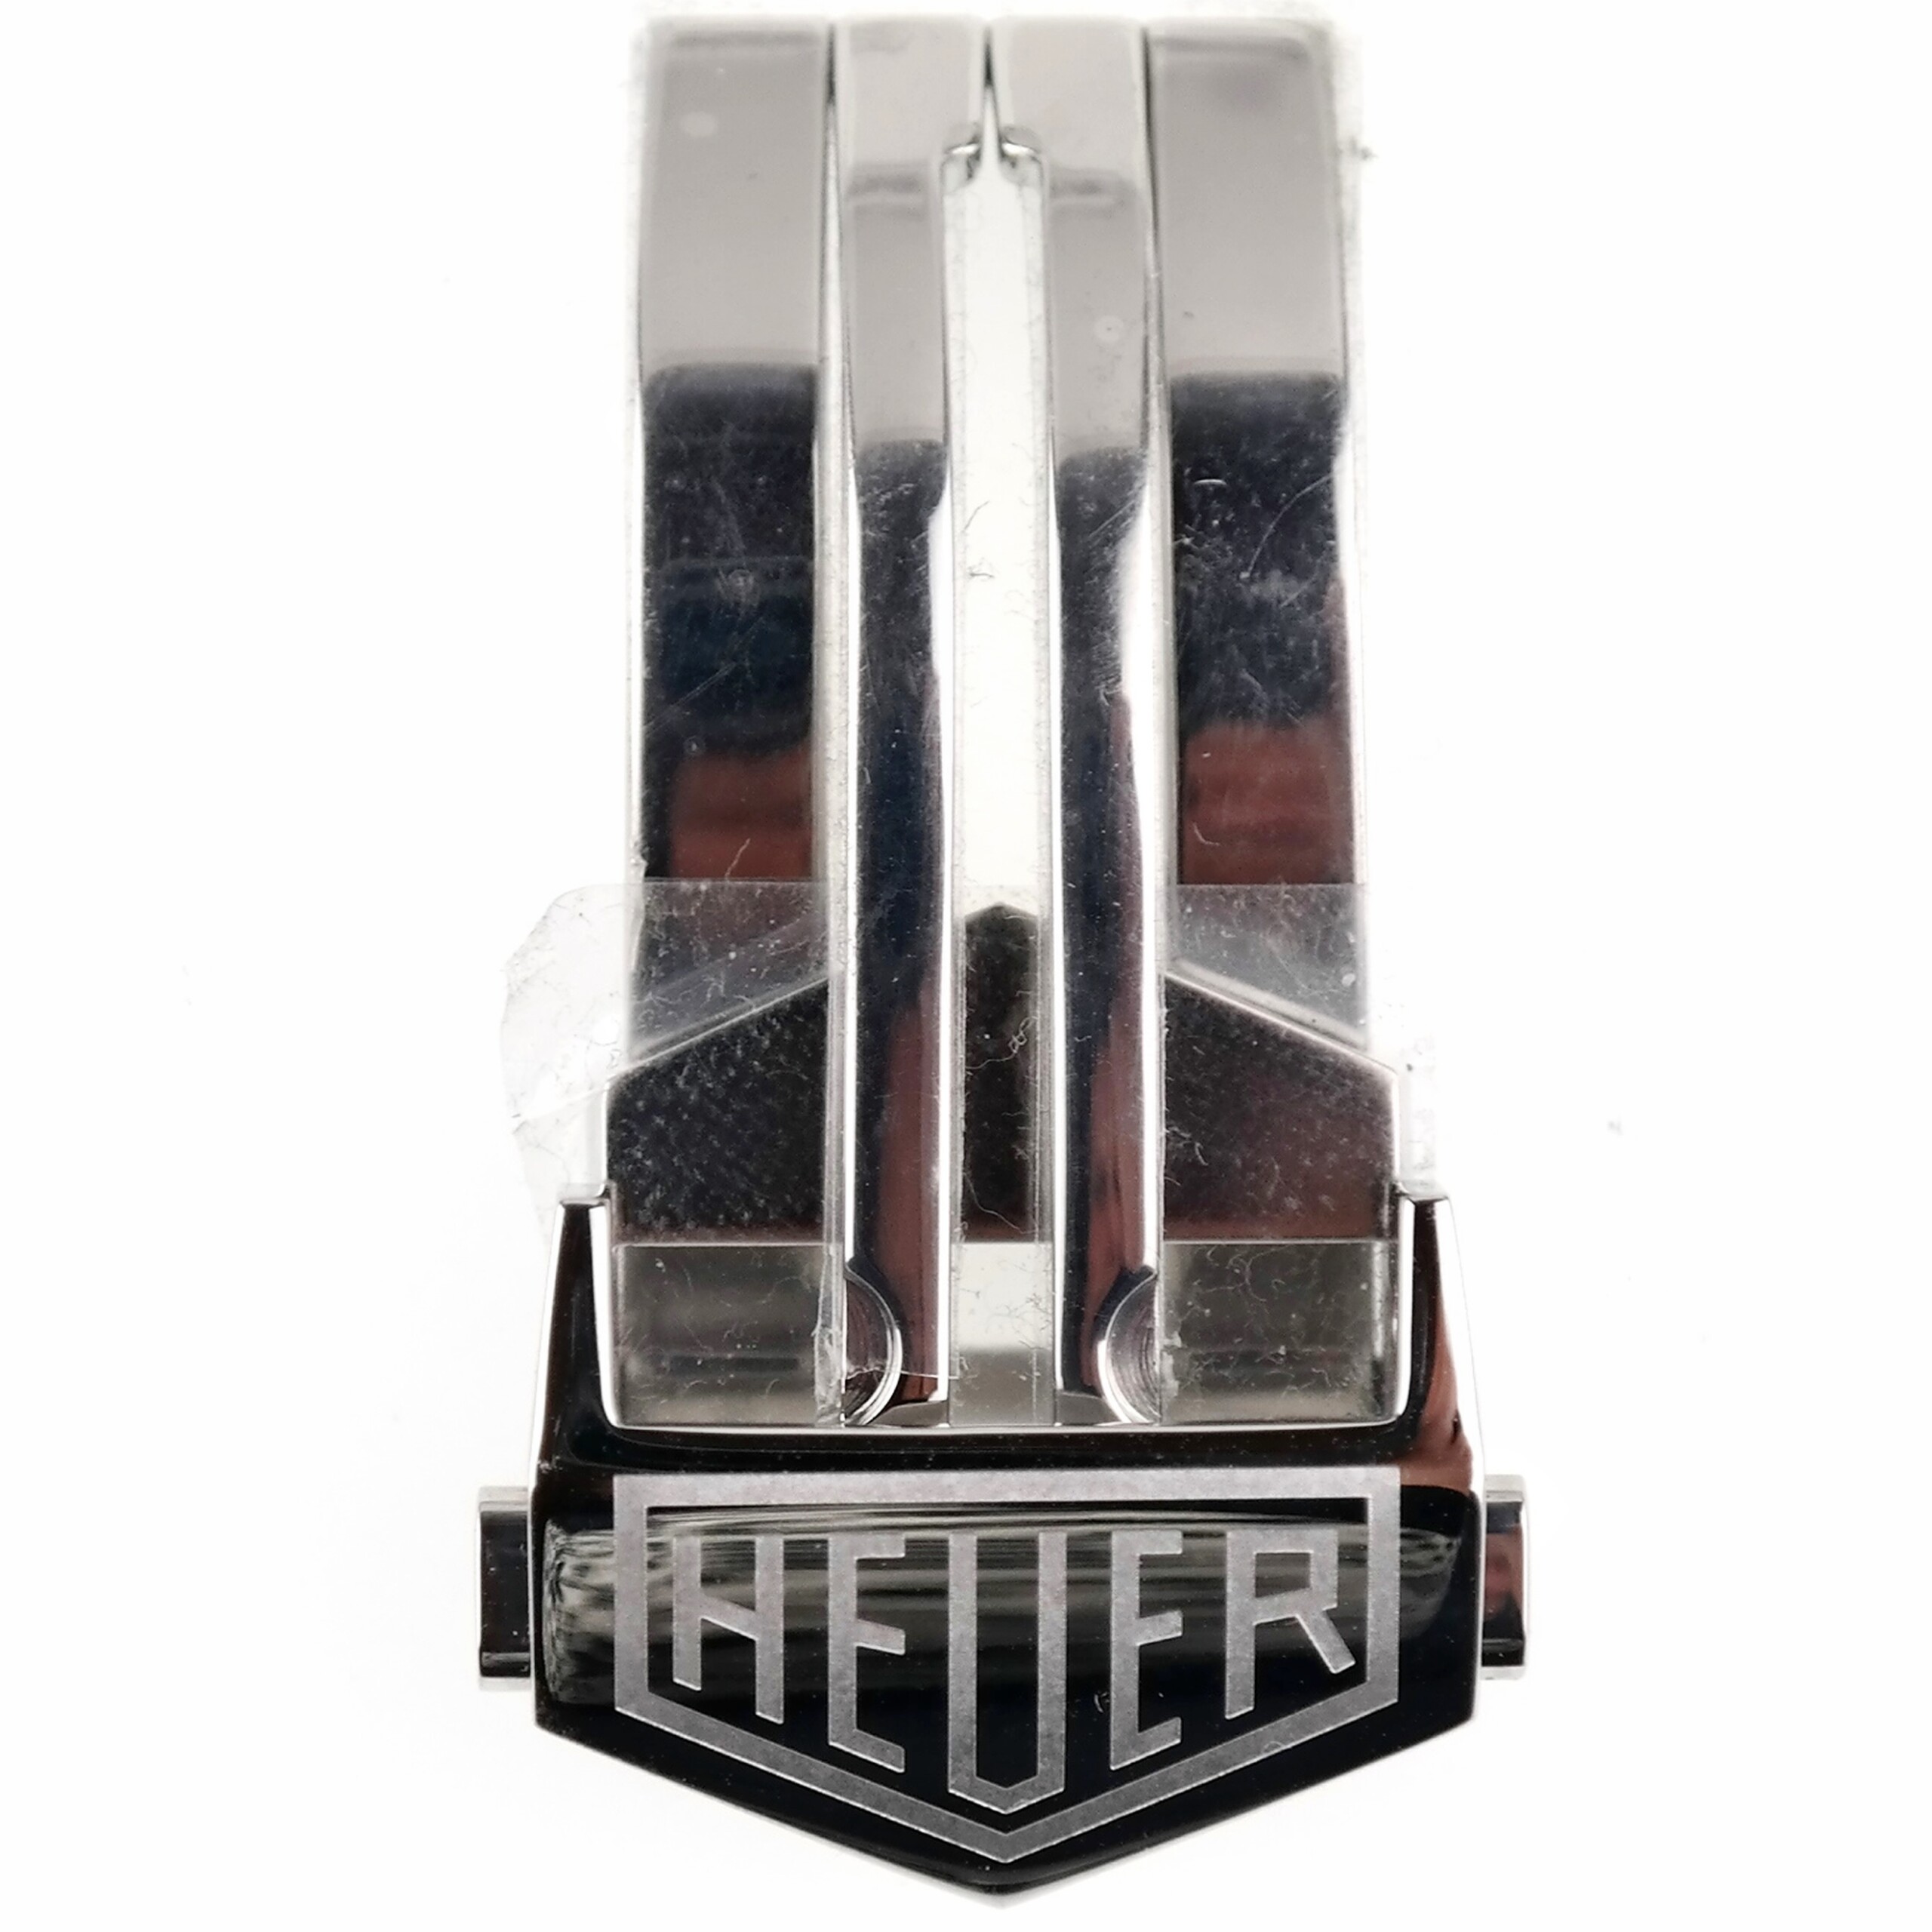 Authentic HEUER by TAG Heuer - Deployant Clasp - Folding Clasp - FC5049